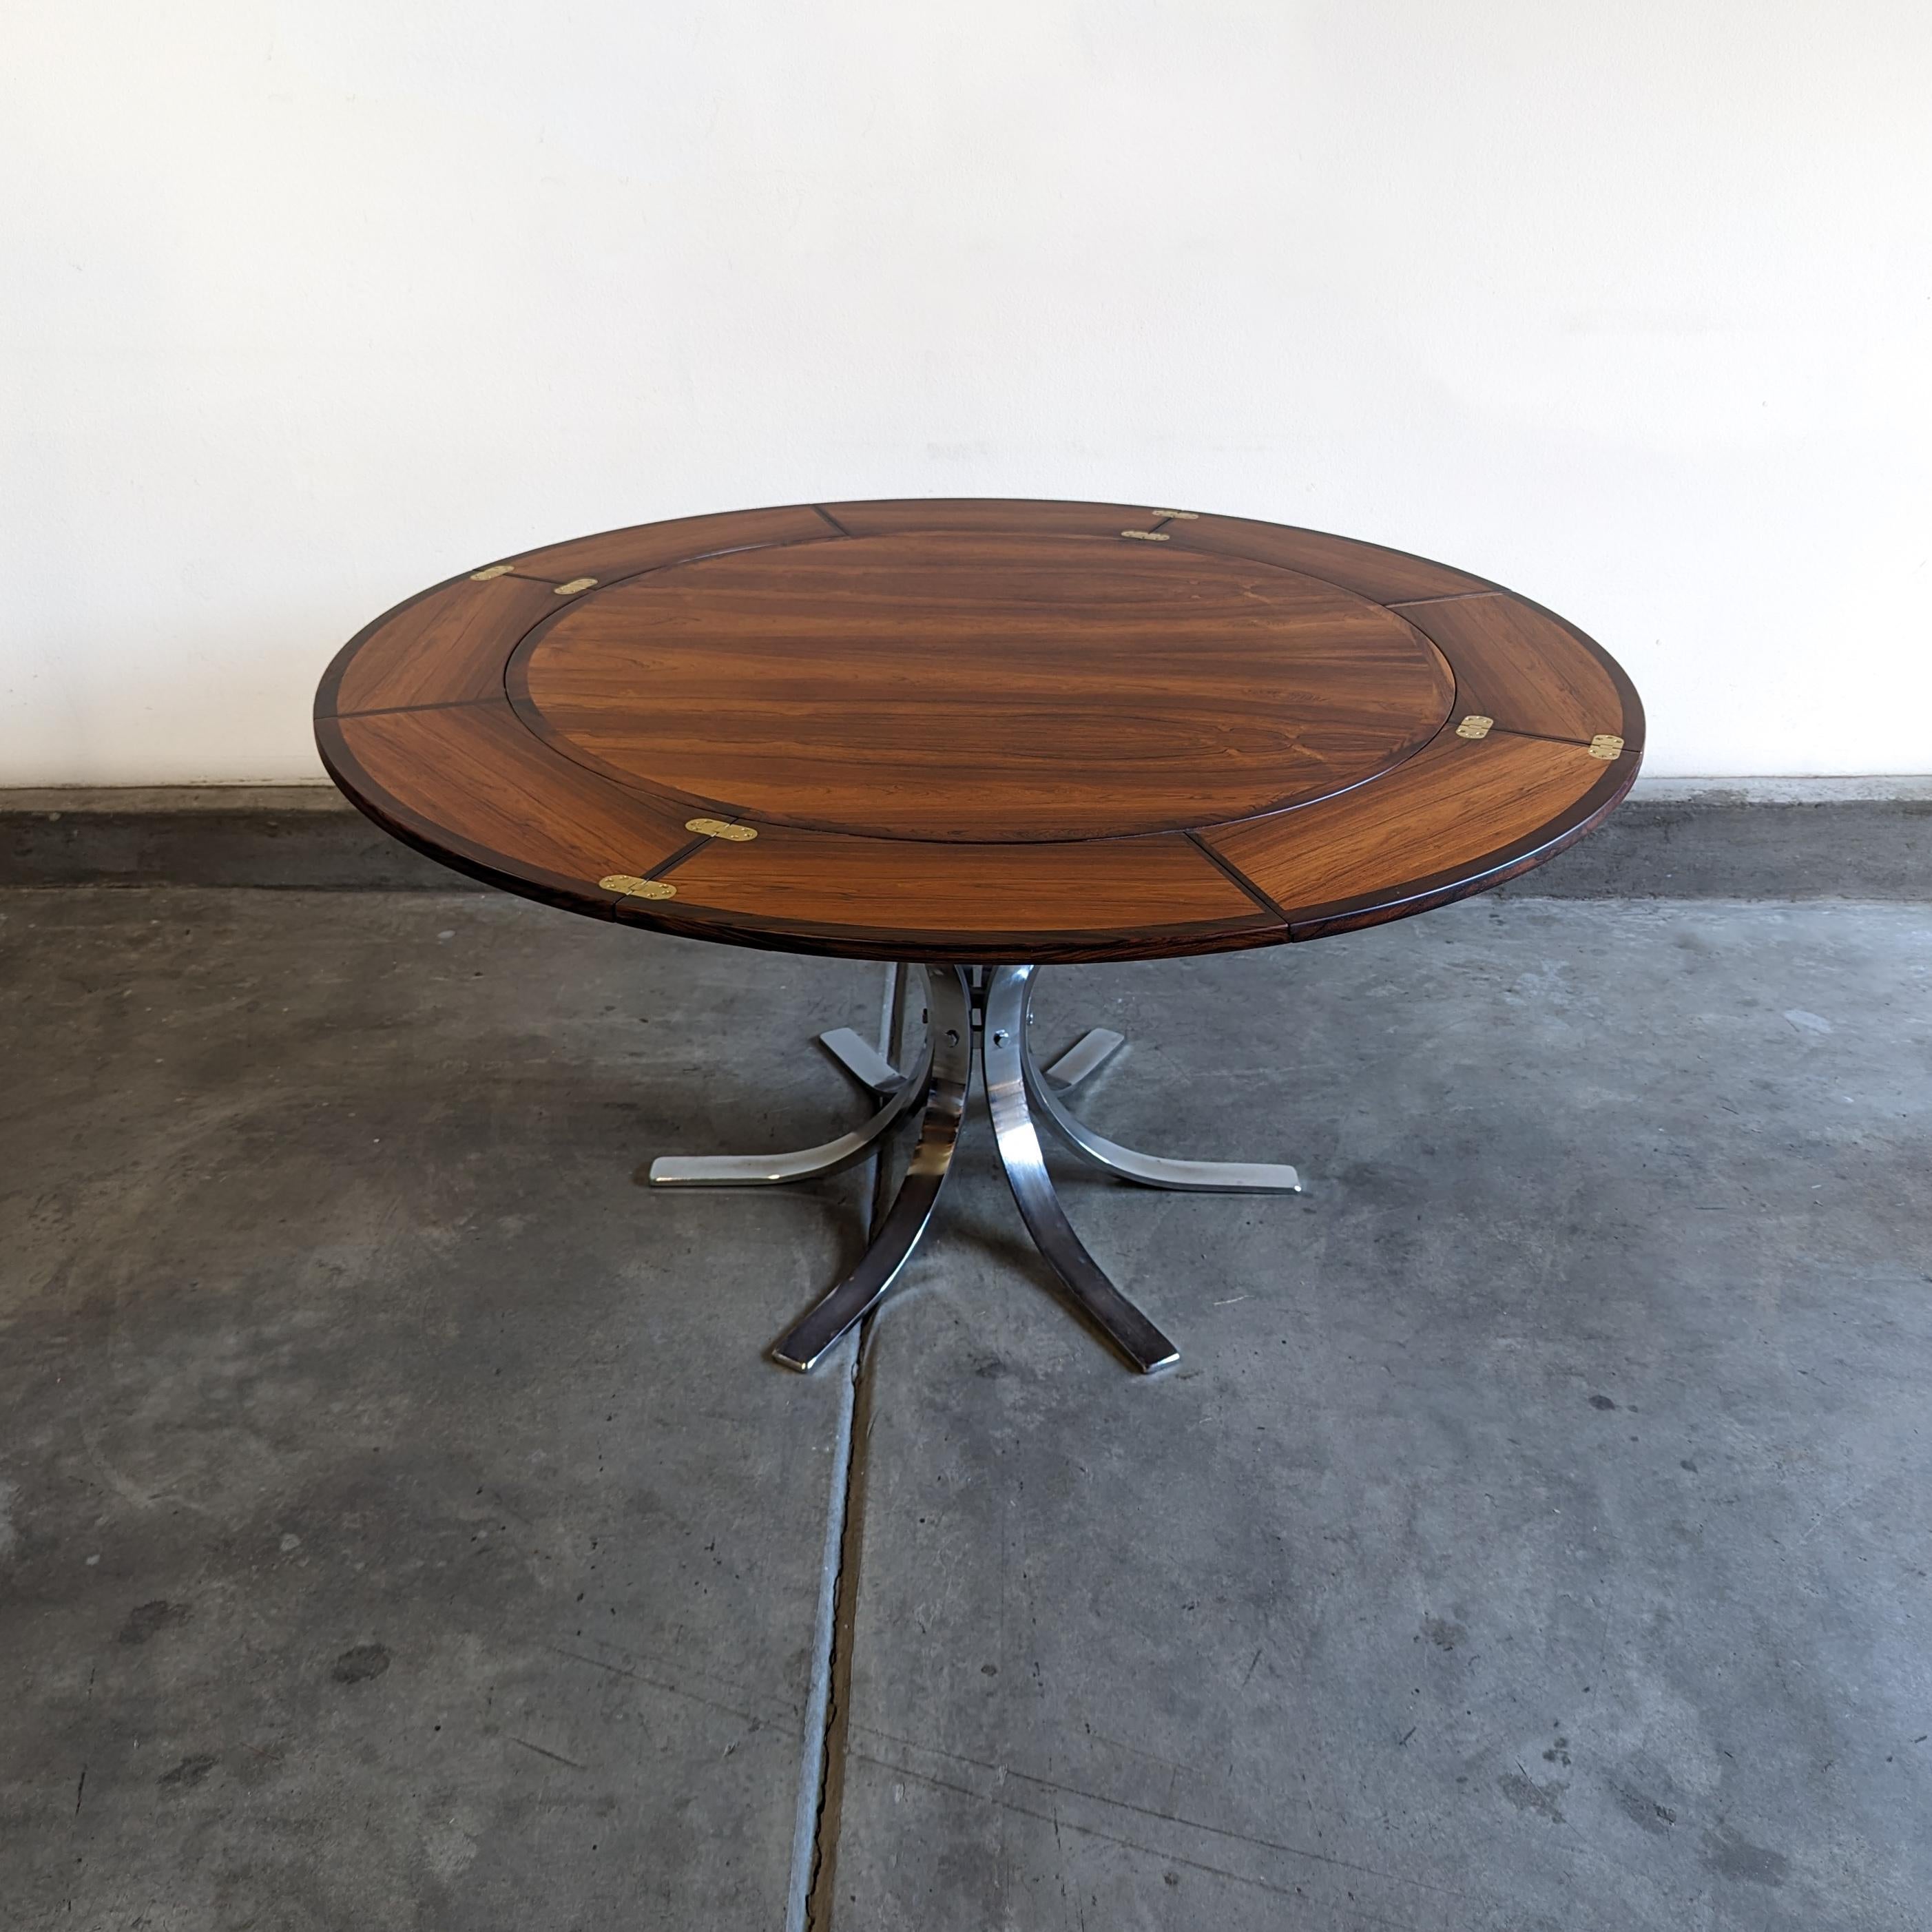 Mid-20th Century Danish Mid Century Rosewood Flip Flap Circular Dining Table by Dyrlund, c1960s For Sale